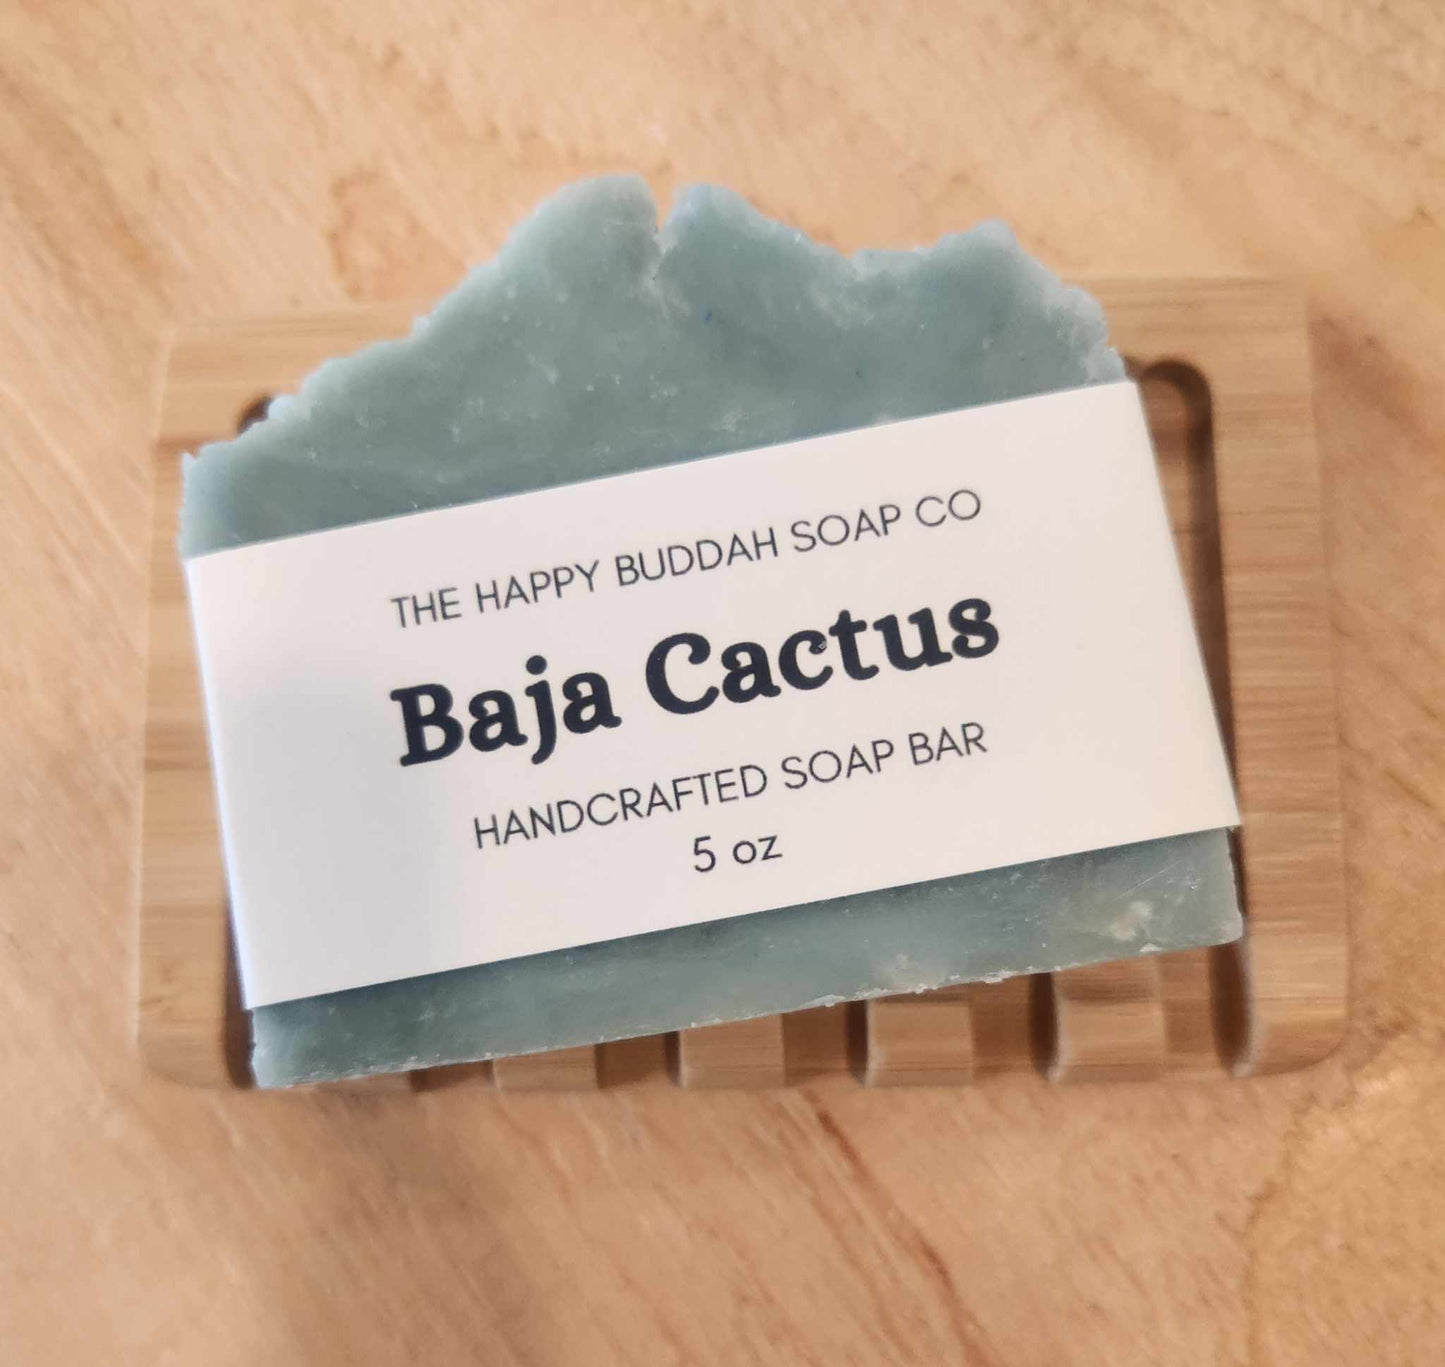 HANDCRAFTED SOAP BARS